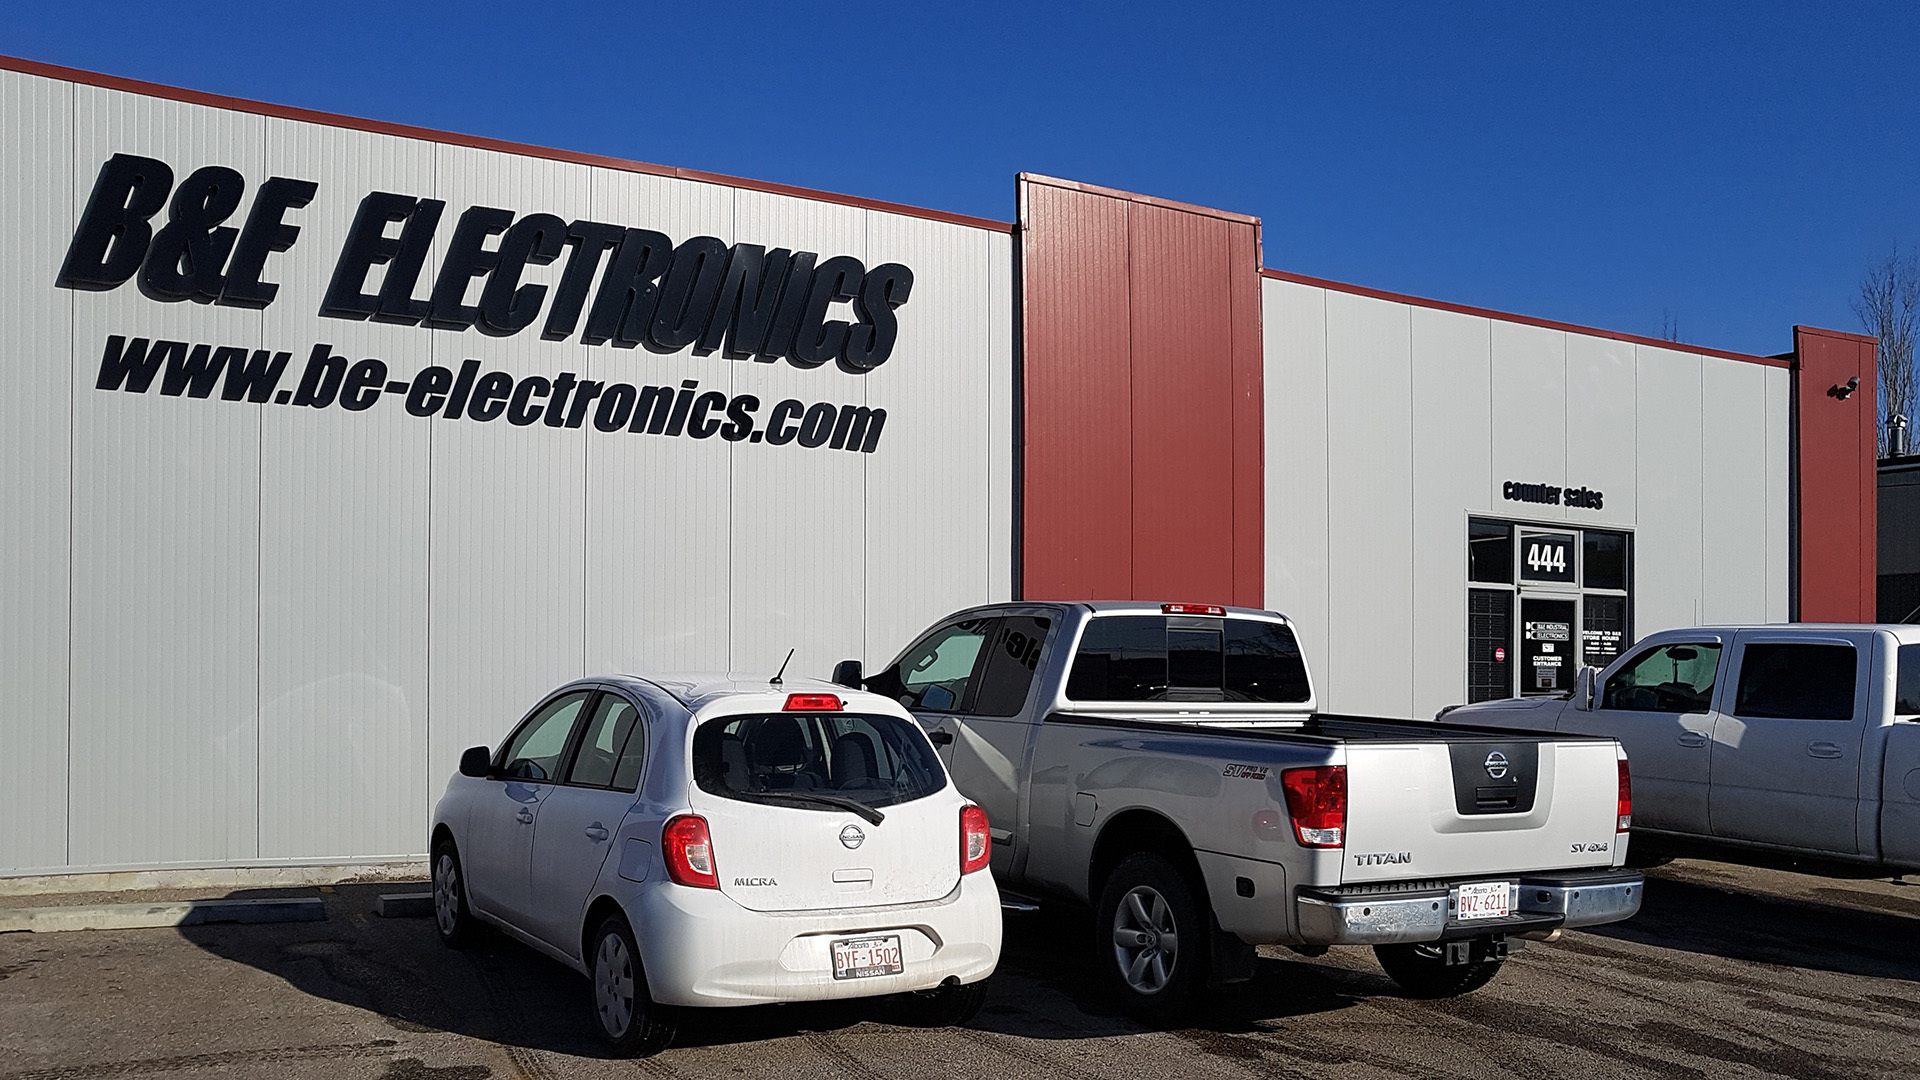 Top 3 Best Places to Buy Electronic Components in Calgary Calgary Reviews